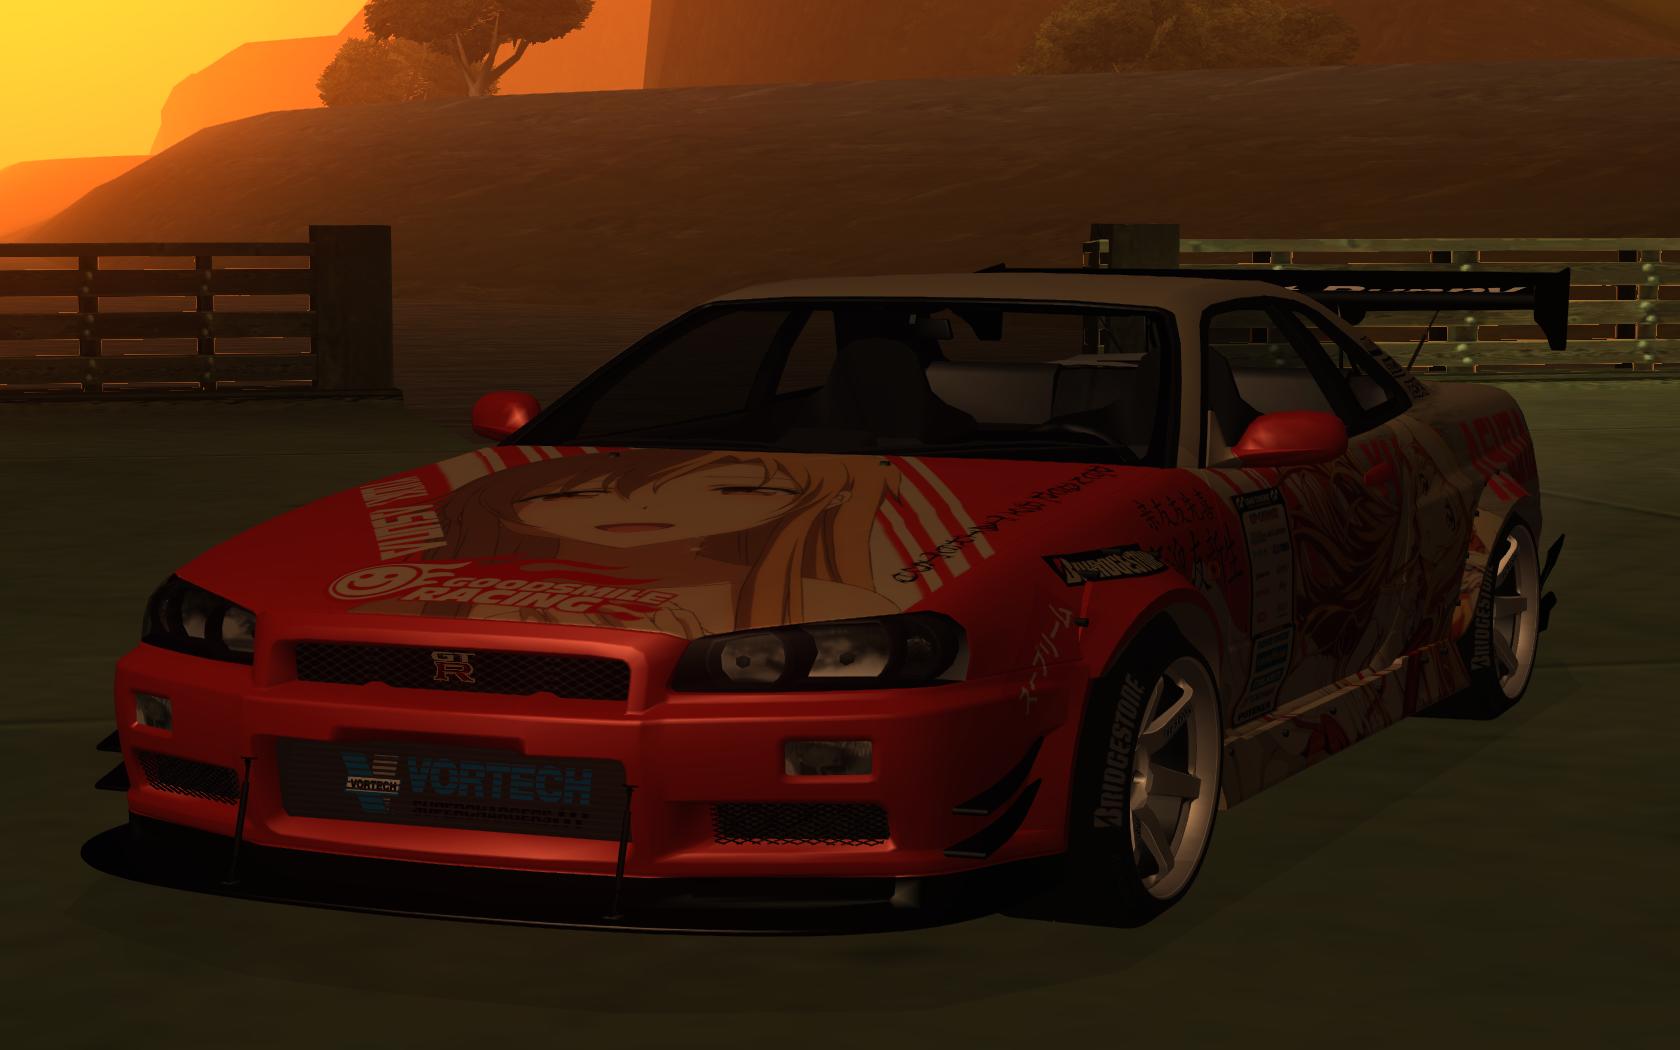 Nissan Skyline Skyline R34 Nissan Skyline GT R R34 GT R Tuning Grand Theft Auto San Andreas 1680x1050